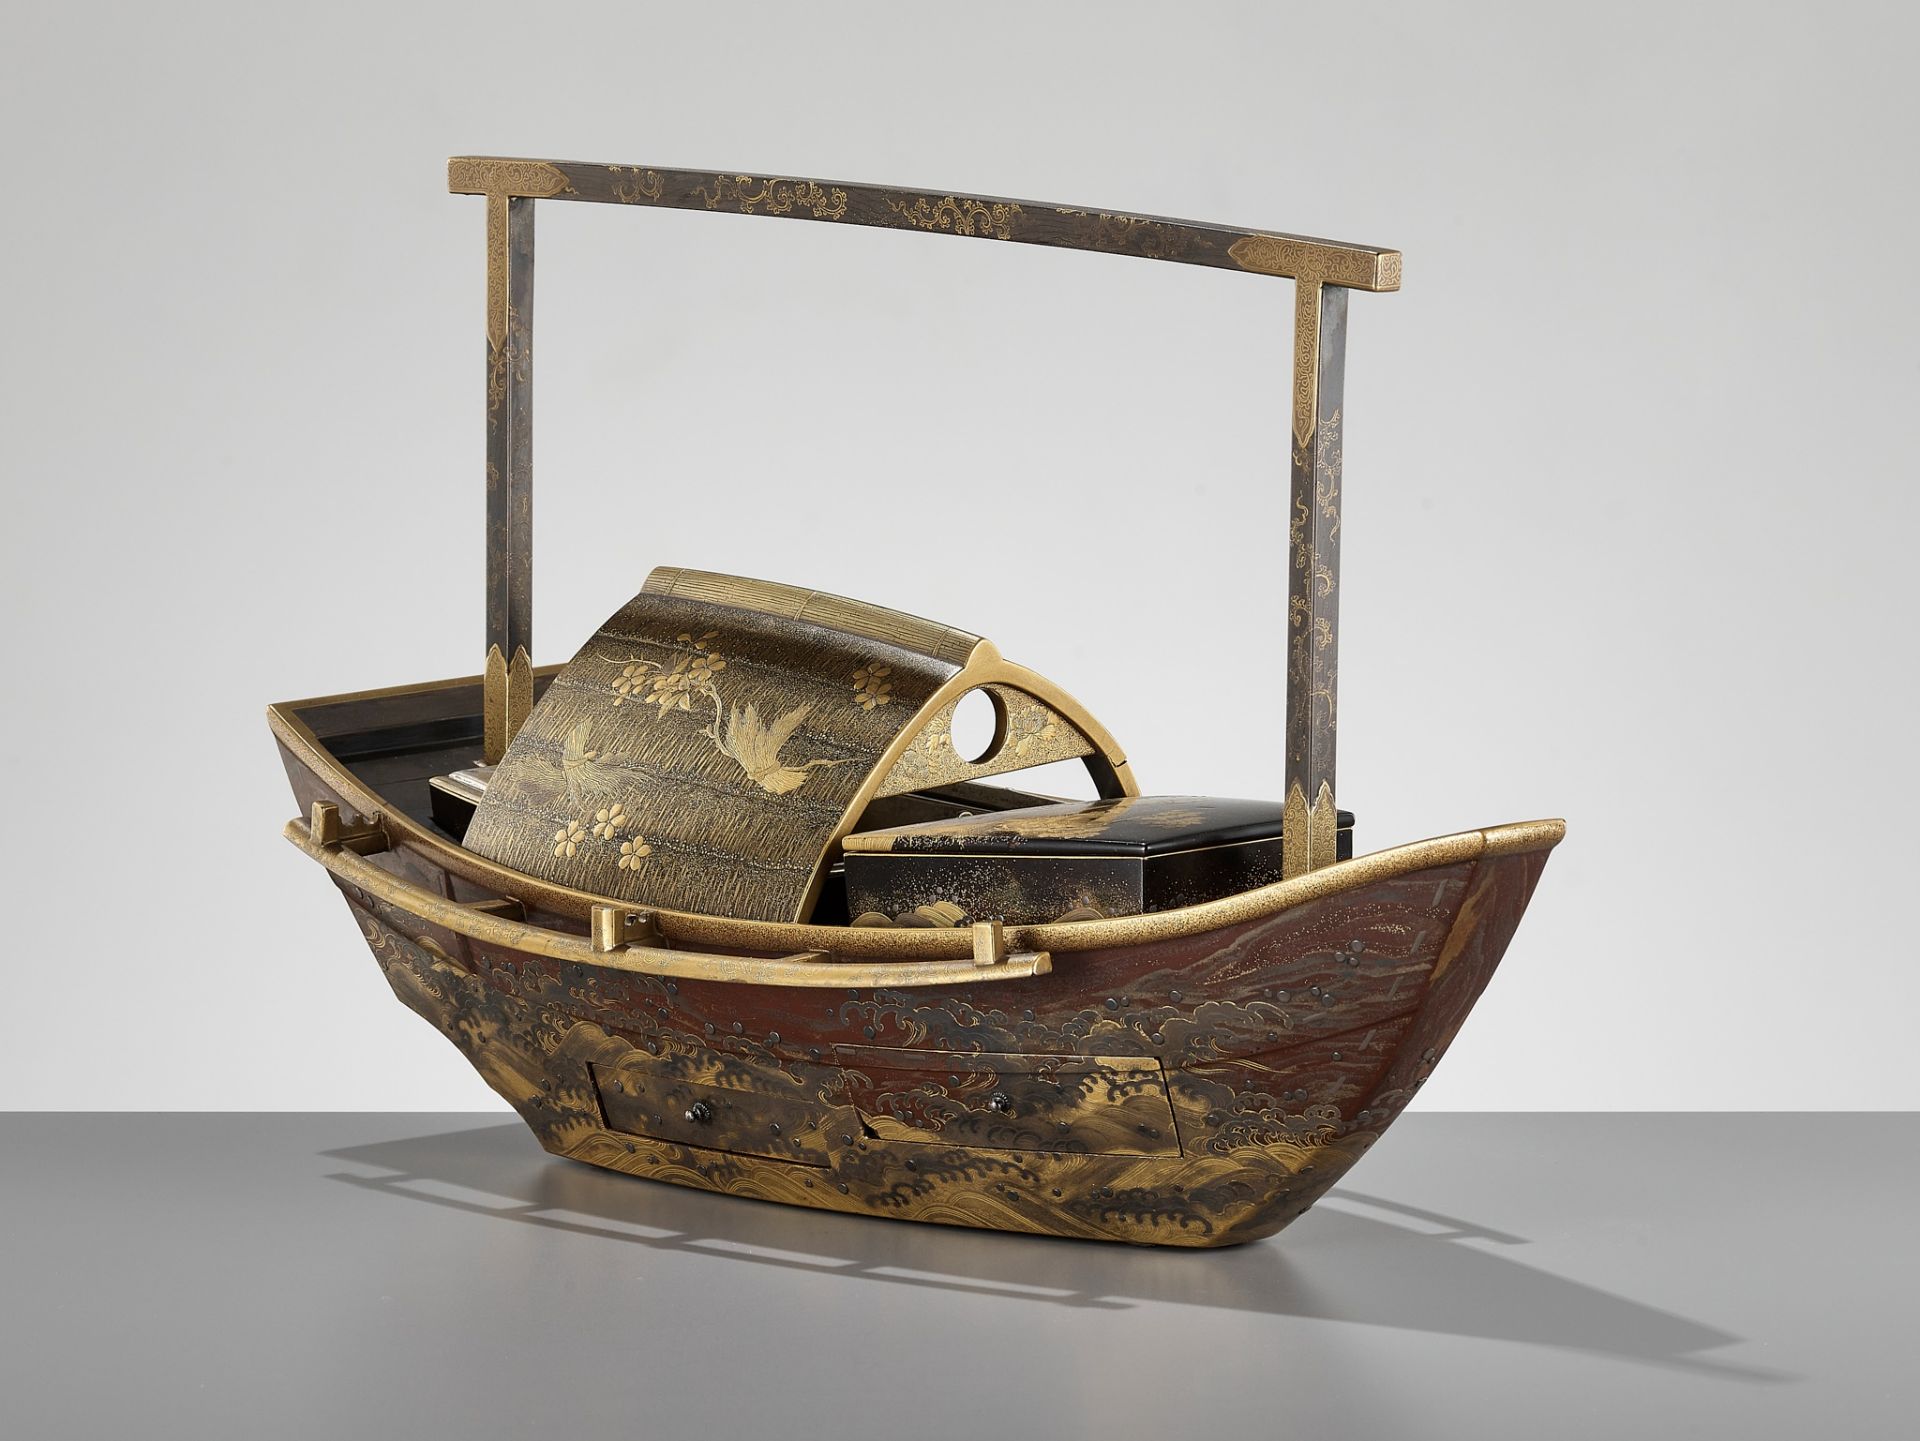 A RARE LACQUER SMOKING SET (TABAKO BON) IN THE FORM OF A BOAT